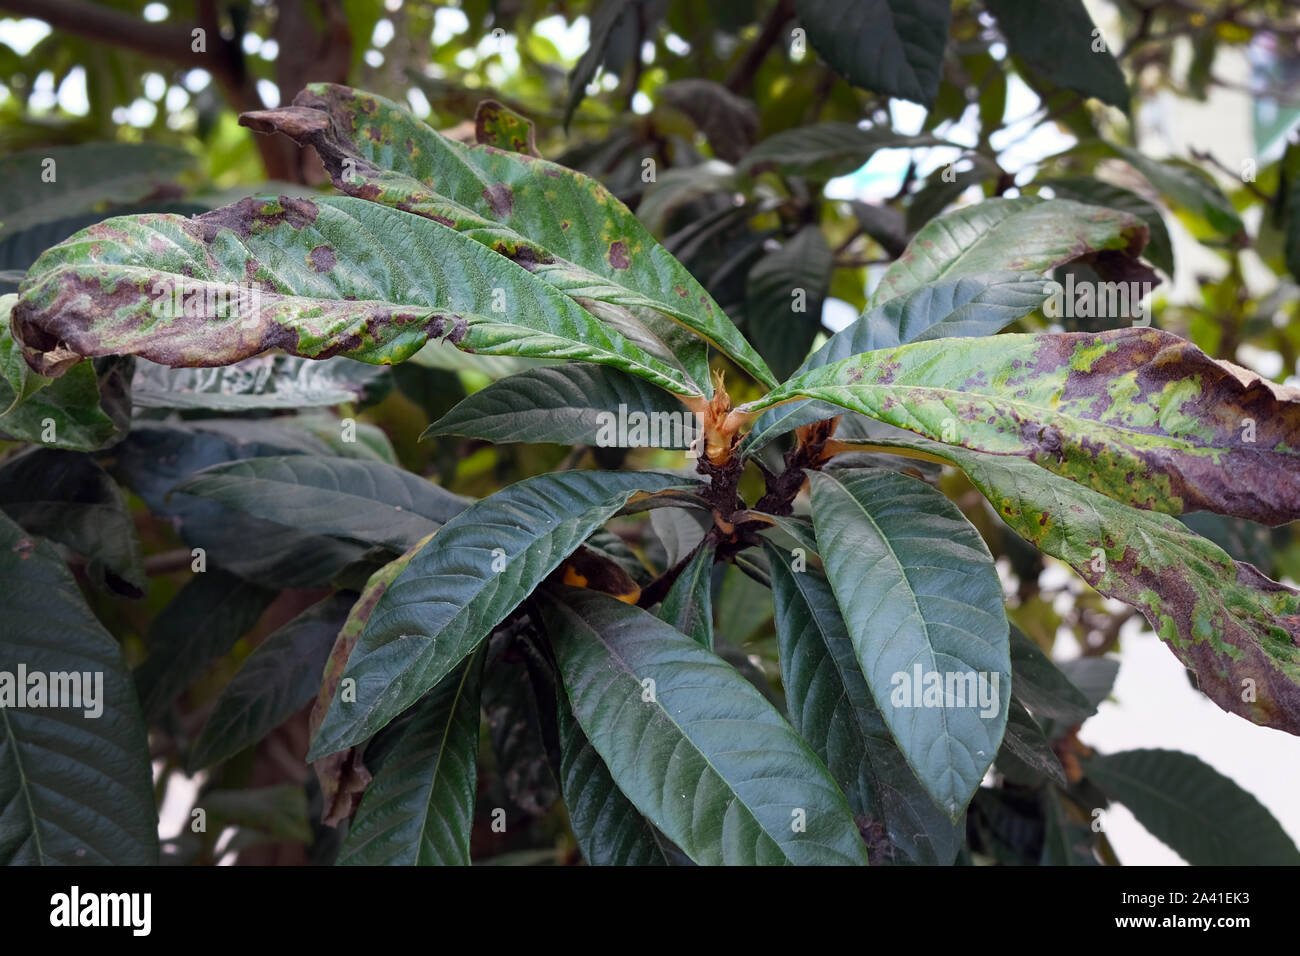 Medlar leaves began to dry out. Fungal disease of the trees after which the leaves dry. The leaves on the tree began to deteriorate and darken. Stock Photo